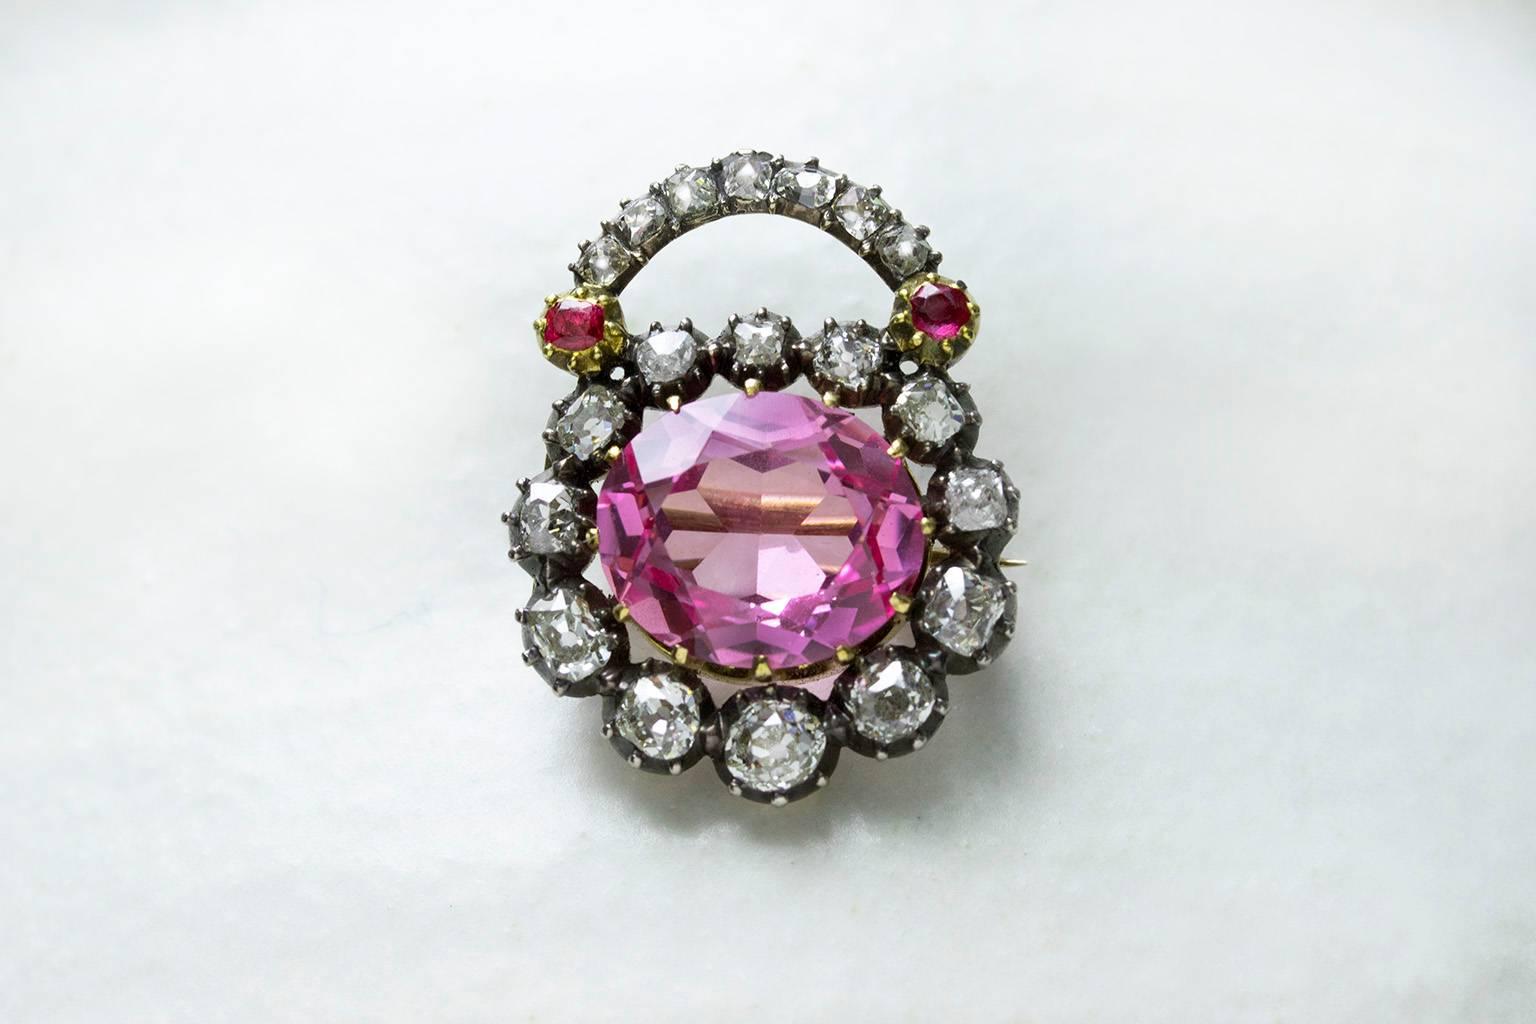 C.1820. A very pretty English diamond padlock pin/pendant. The padlock is made of 19 sparkly diamonds (7 old European and 12 old mine cut), and the center stone is an early 20th century synthetic pink sapphire in the size of 5.06 ct, which was most